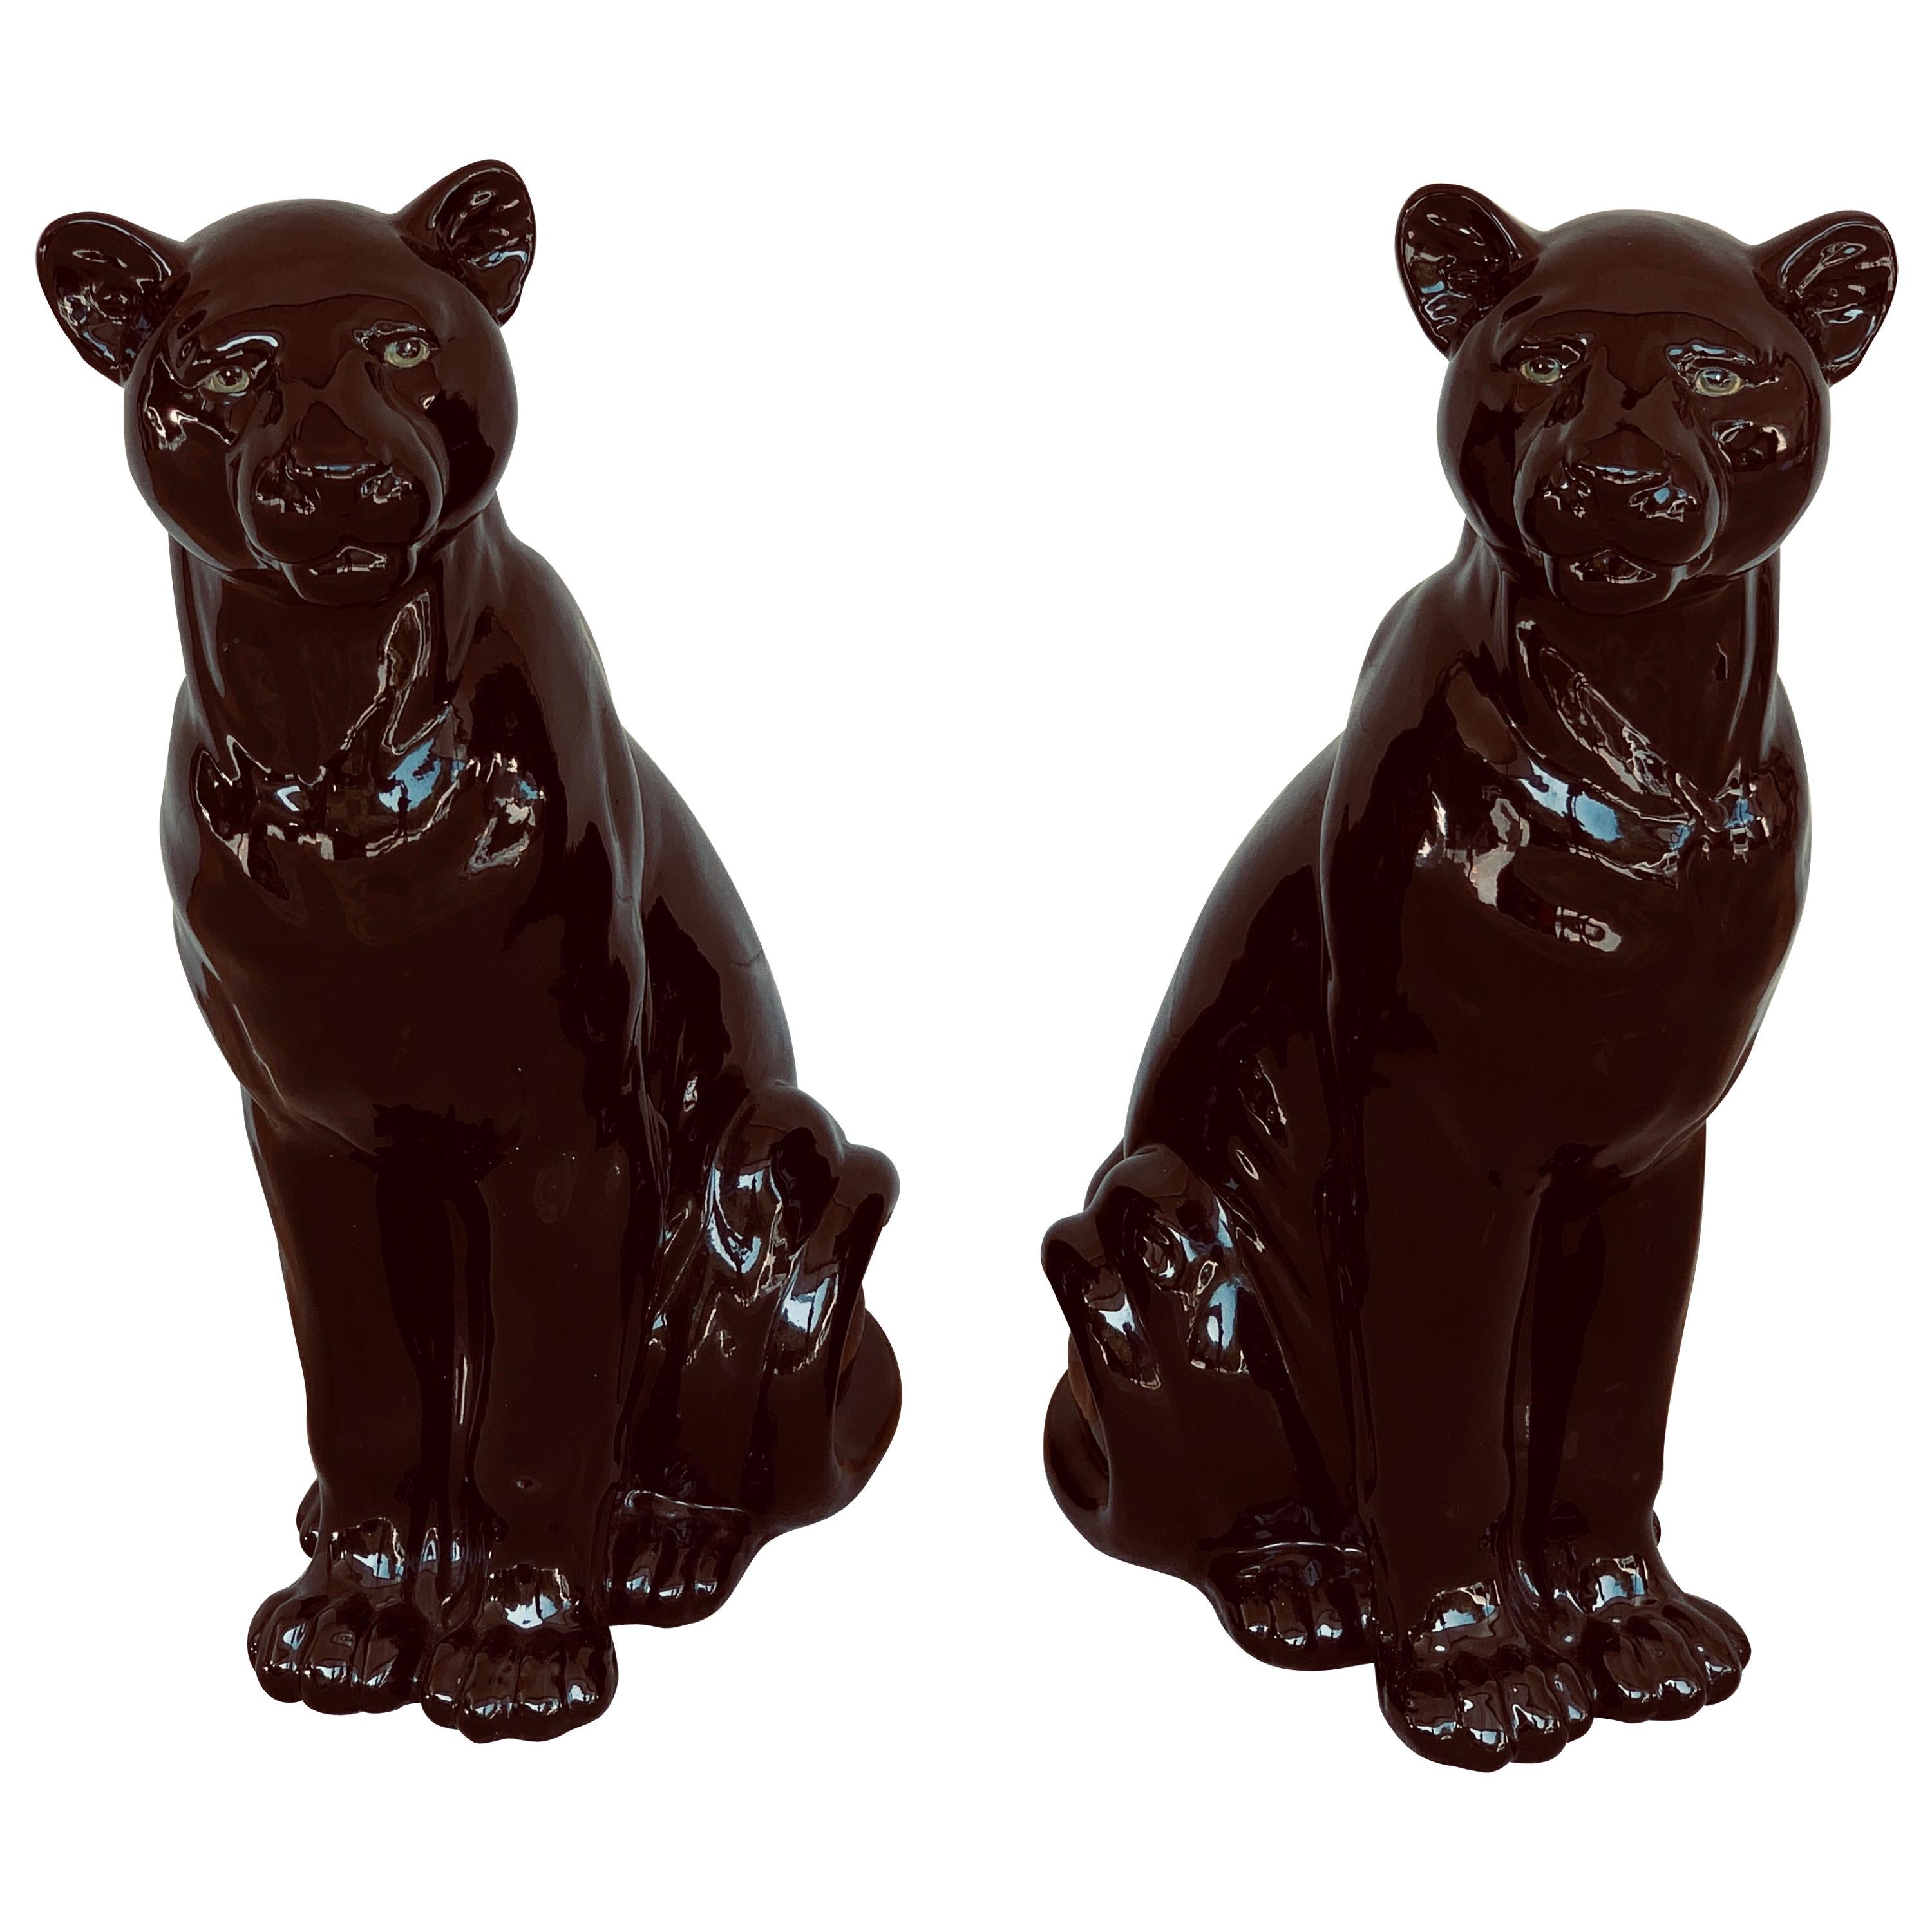 Pair of Italian Porcelain Seated Black Panthers For Sale